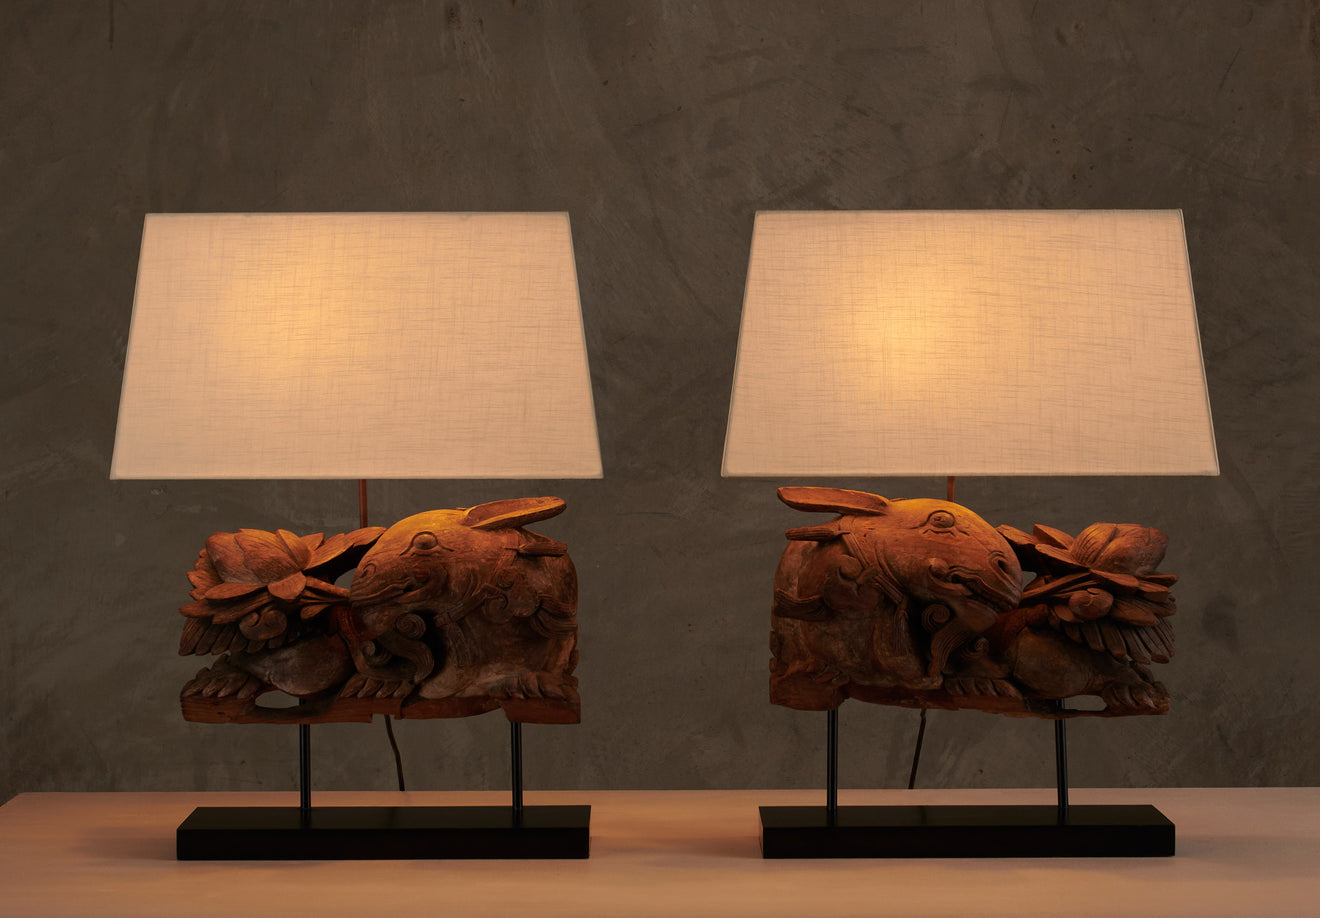 ZOOMORPHIC ANCIENT CARVING LAMP(S)